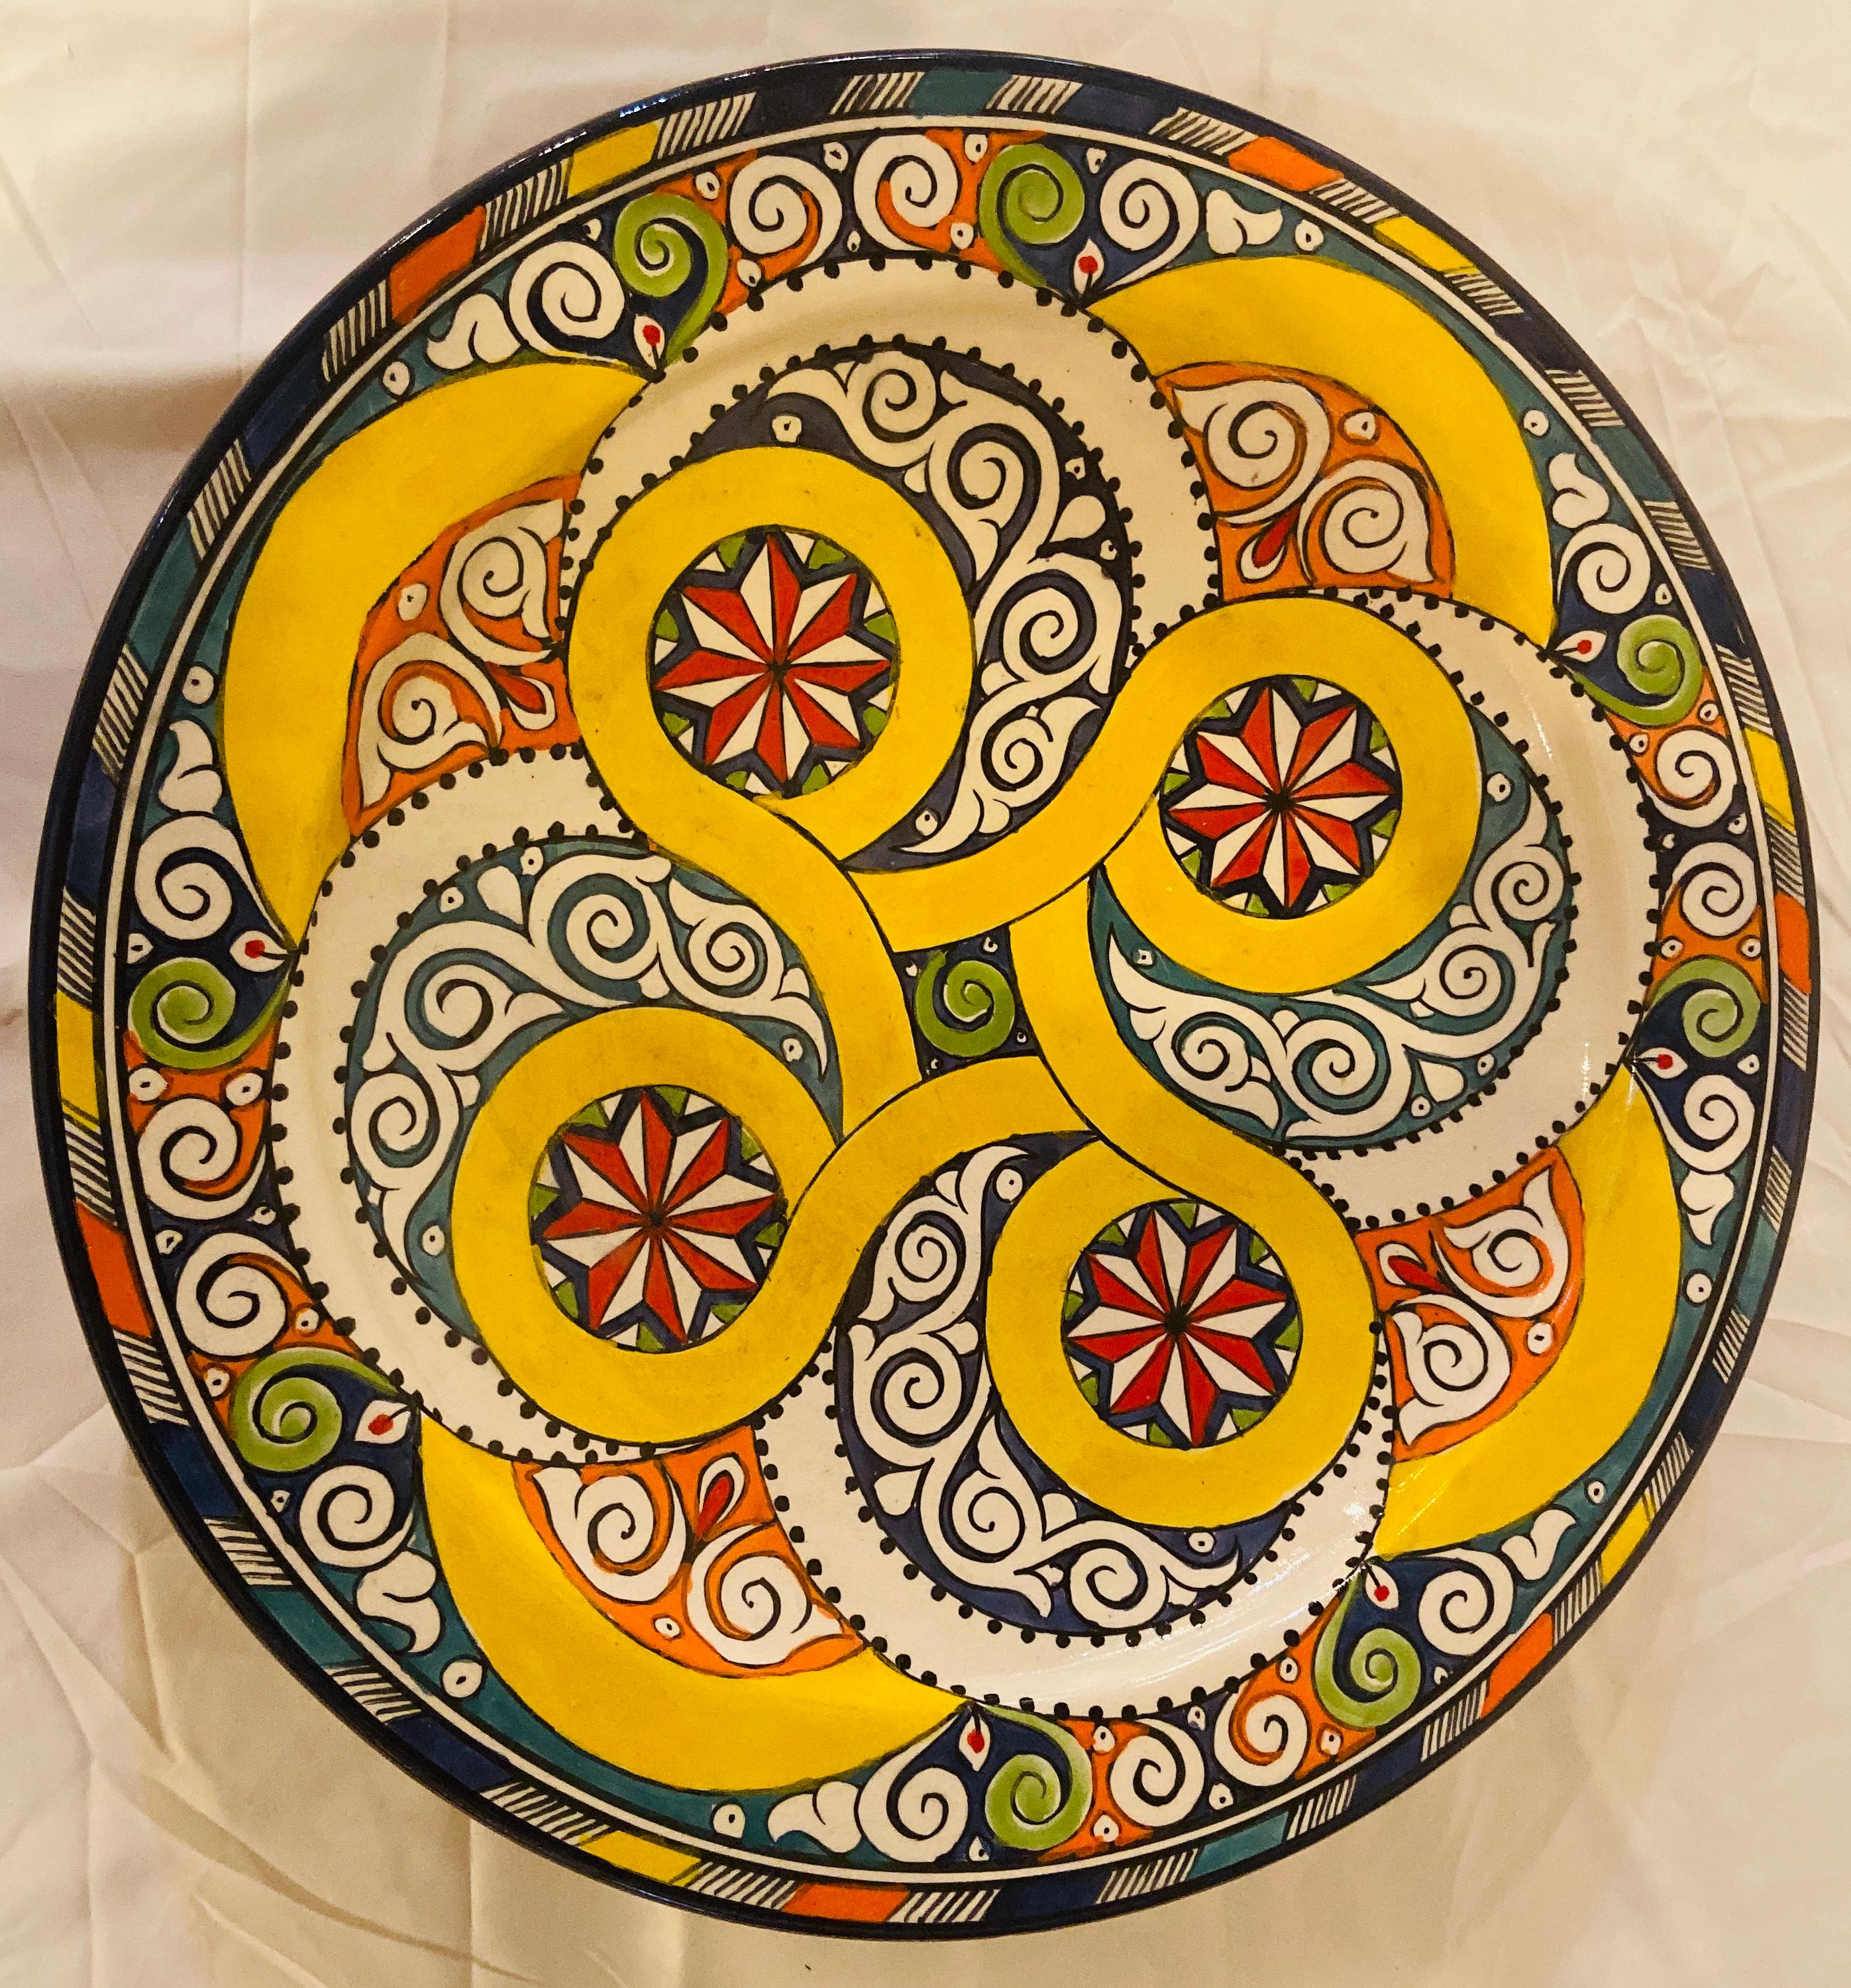 With a delightful floral and arabesque design hand painted in multiple colors in blue, yellow and red, these gorgeous, large-size ceramic dinner plate possesses a truly exotic look. Handcrafted in the bustling workshops of master artisans in the